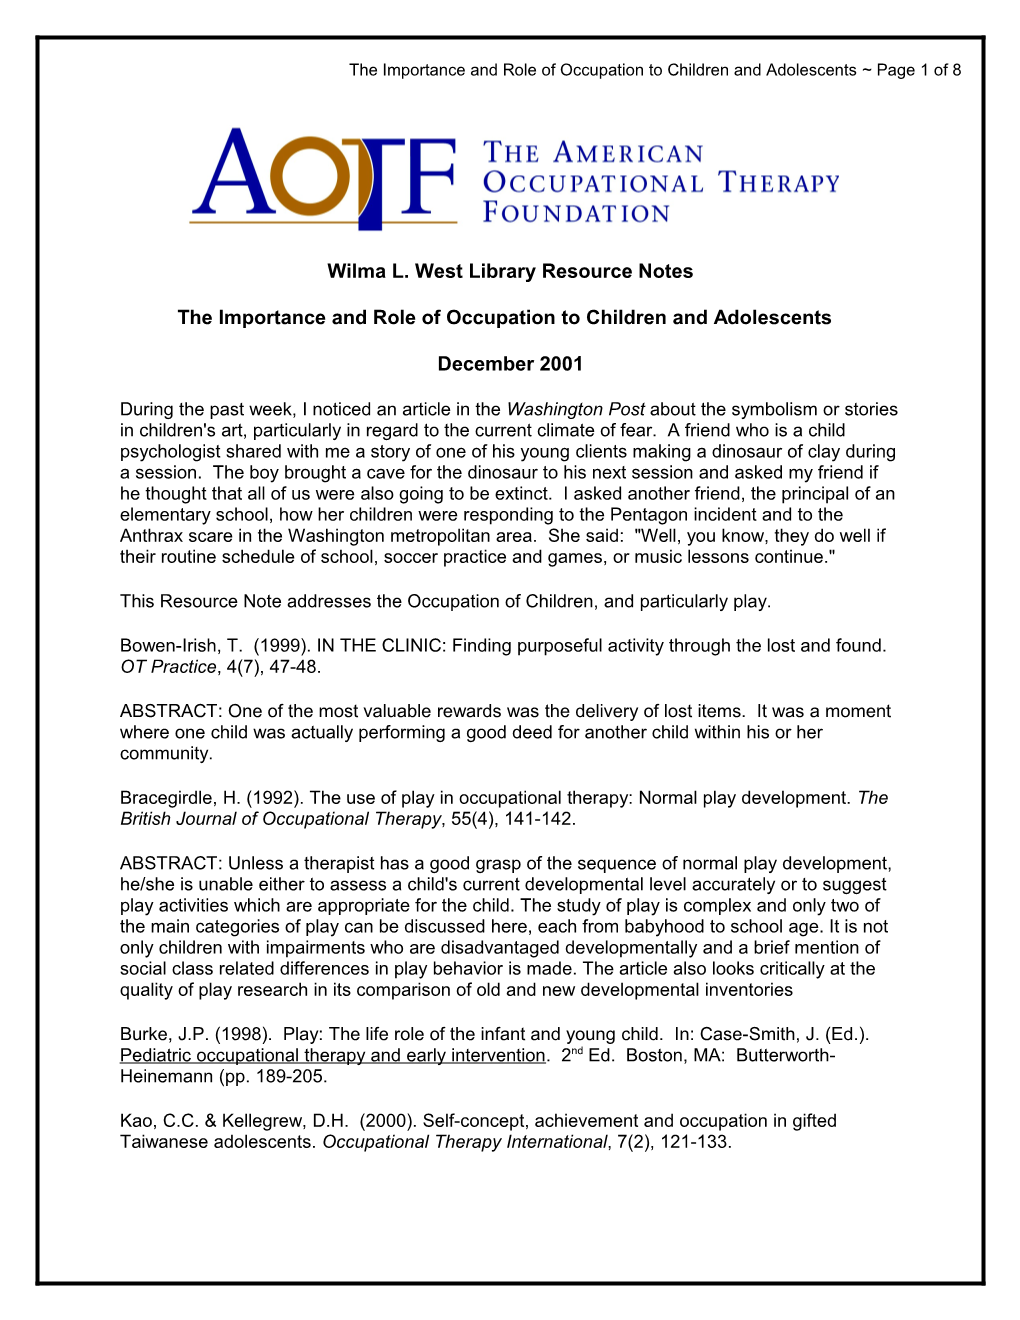 The Importance and Role of Occupation to Children and Adolescents Page 1 of 8